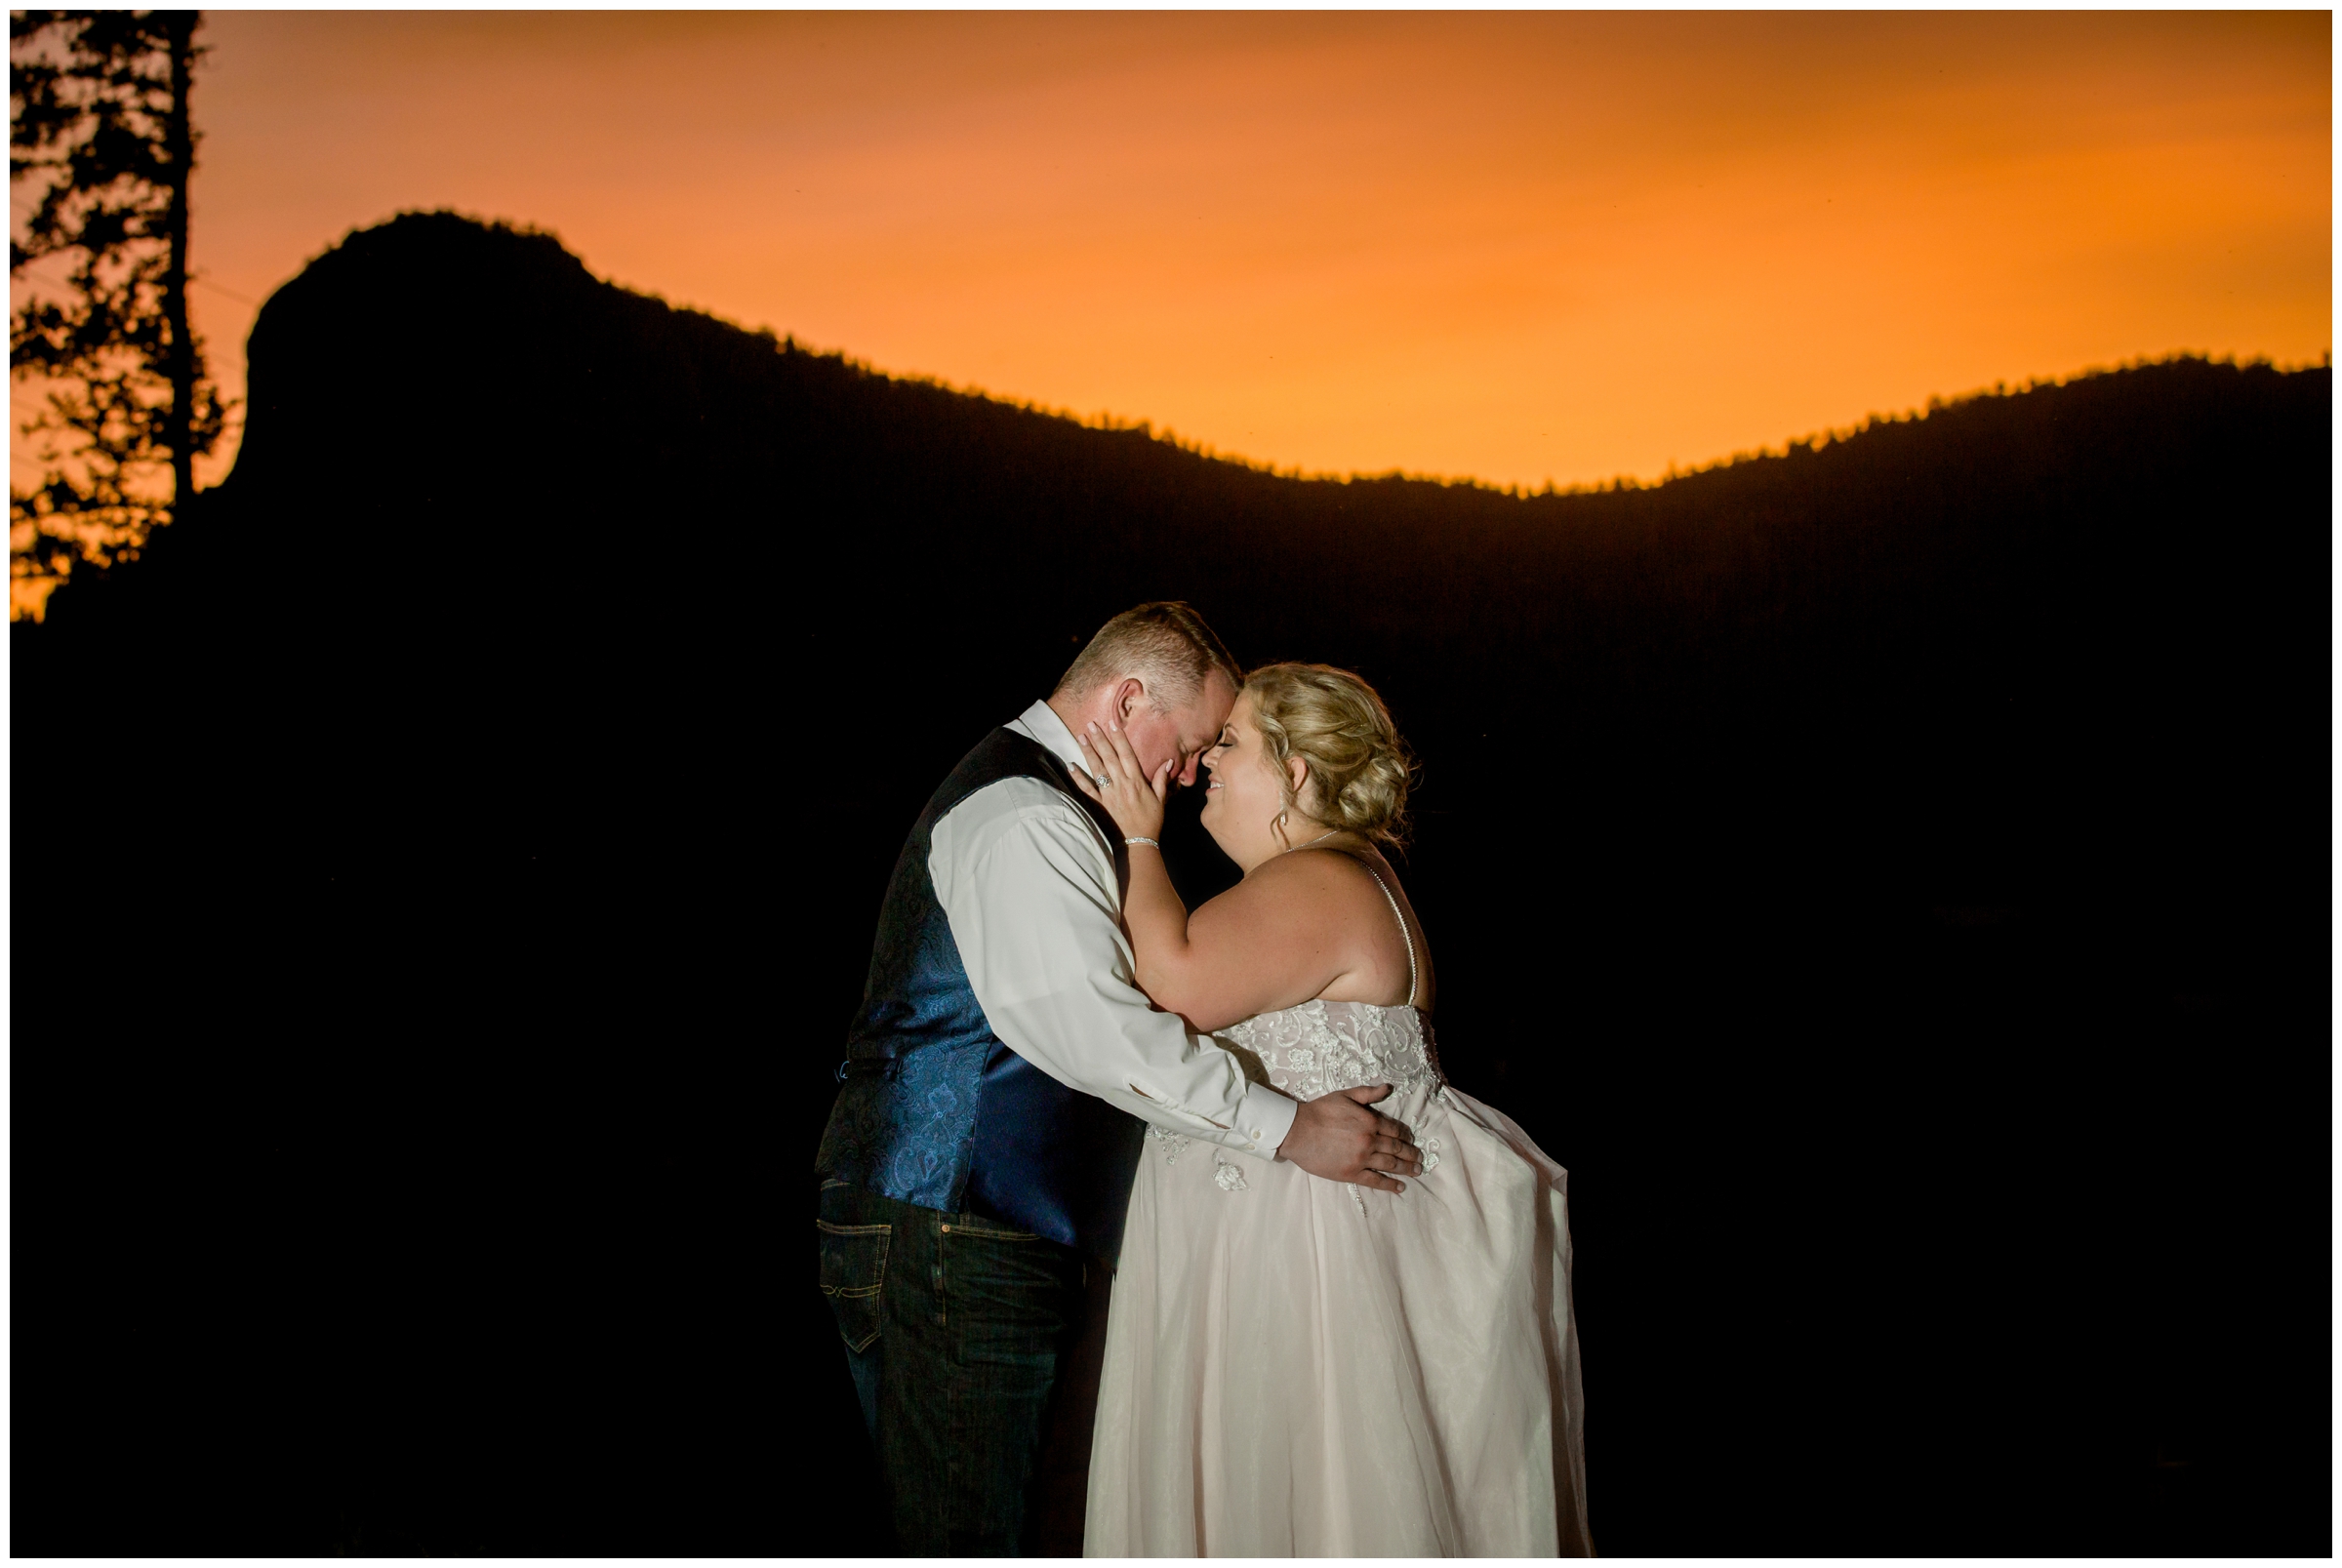 colorful sunset wedding photos at Wedgewood Mountain View Ranch